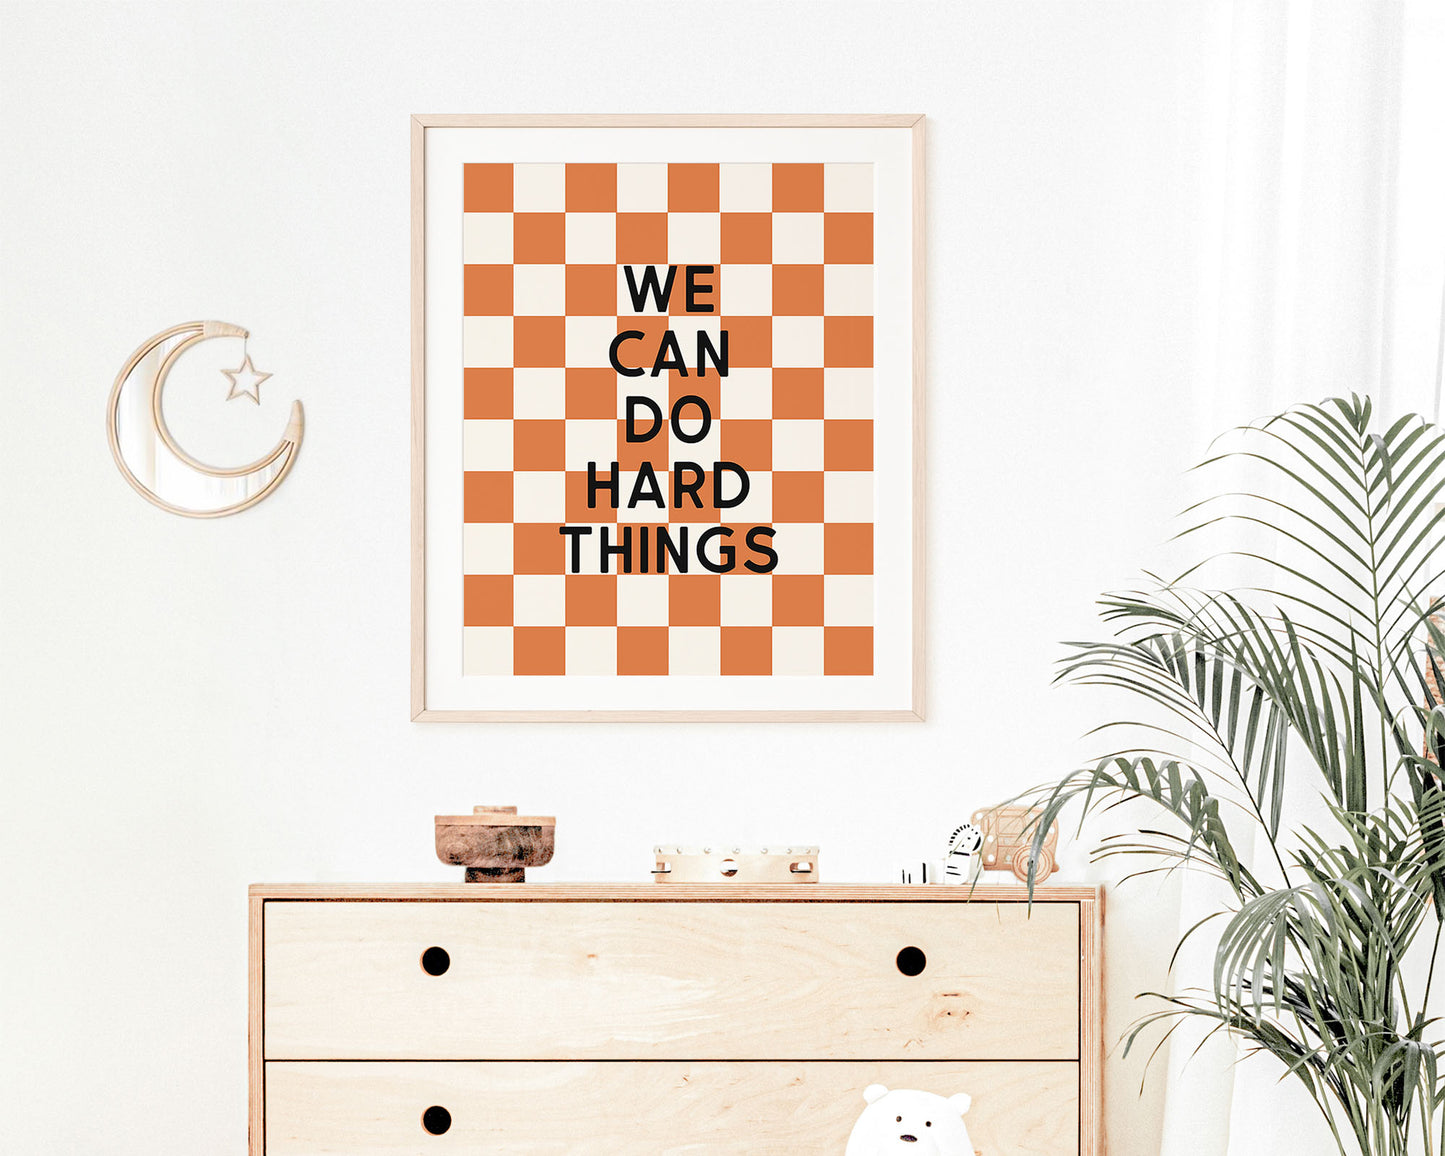 We Can Do Hard Things Instant Download Digital File featuring block lettering in black on an orange and off white checkered background. Perfect for Baby Girls Nursery Decor, Toddler Boys Bedroom Decor or Little Kids Playroom Wall Art.